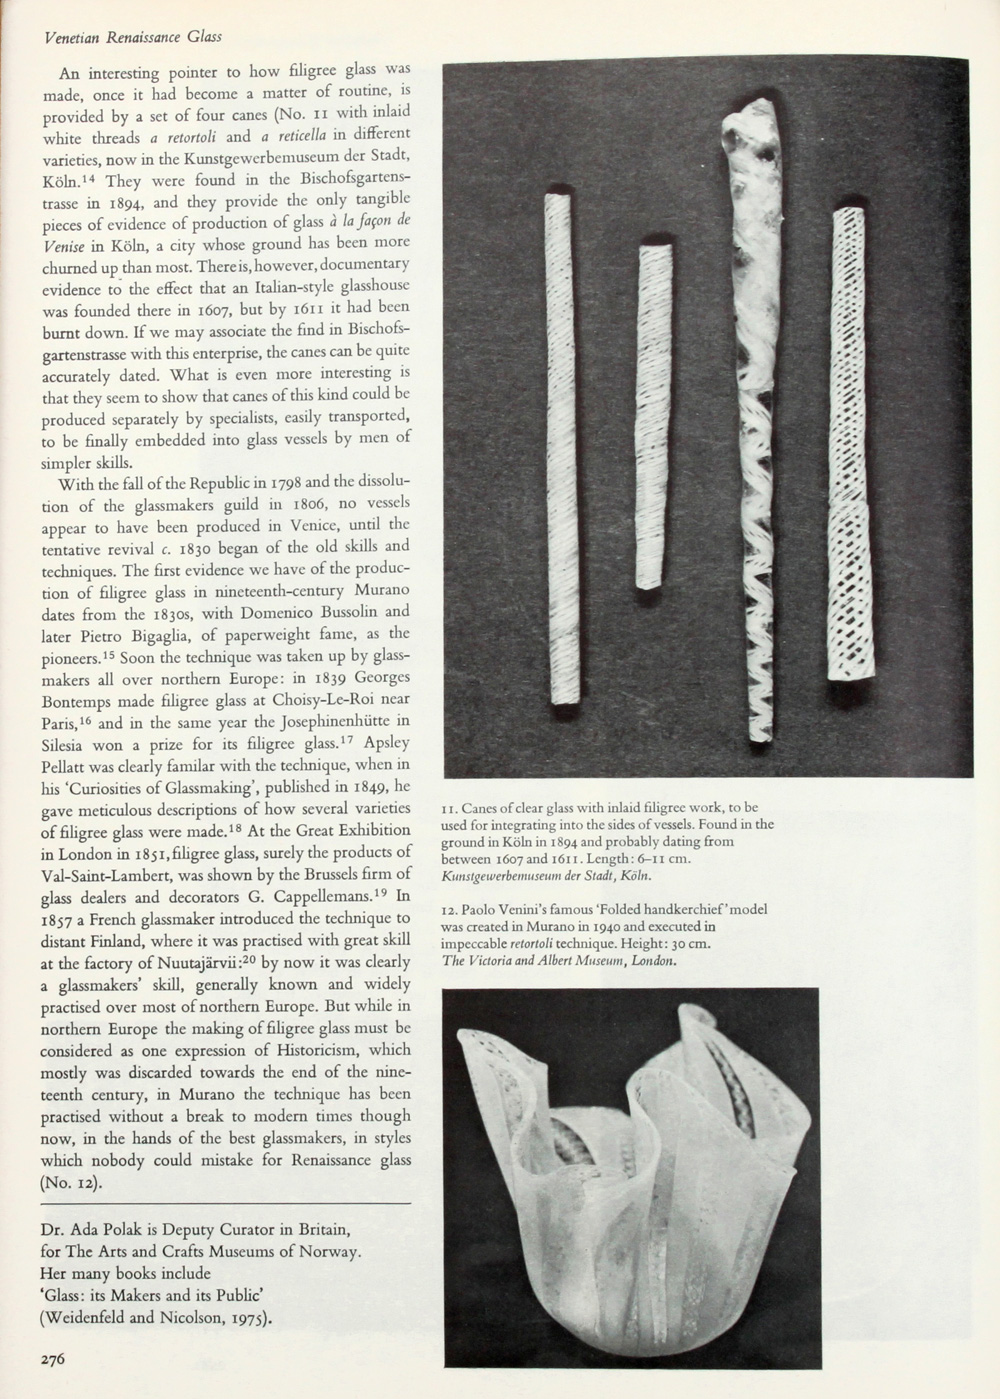 The CONNOISSEUR back issues - August 1976 - Venetian Renaissance Glass - problems of dating vetro a filigrana by Ada Polak - Page 276